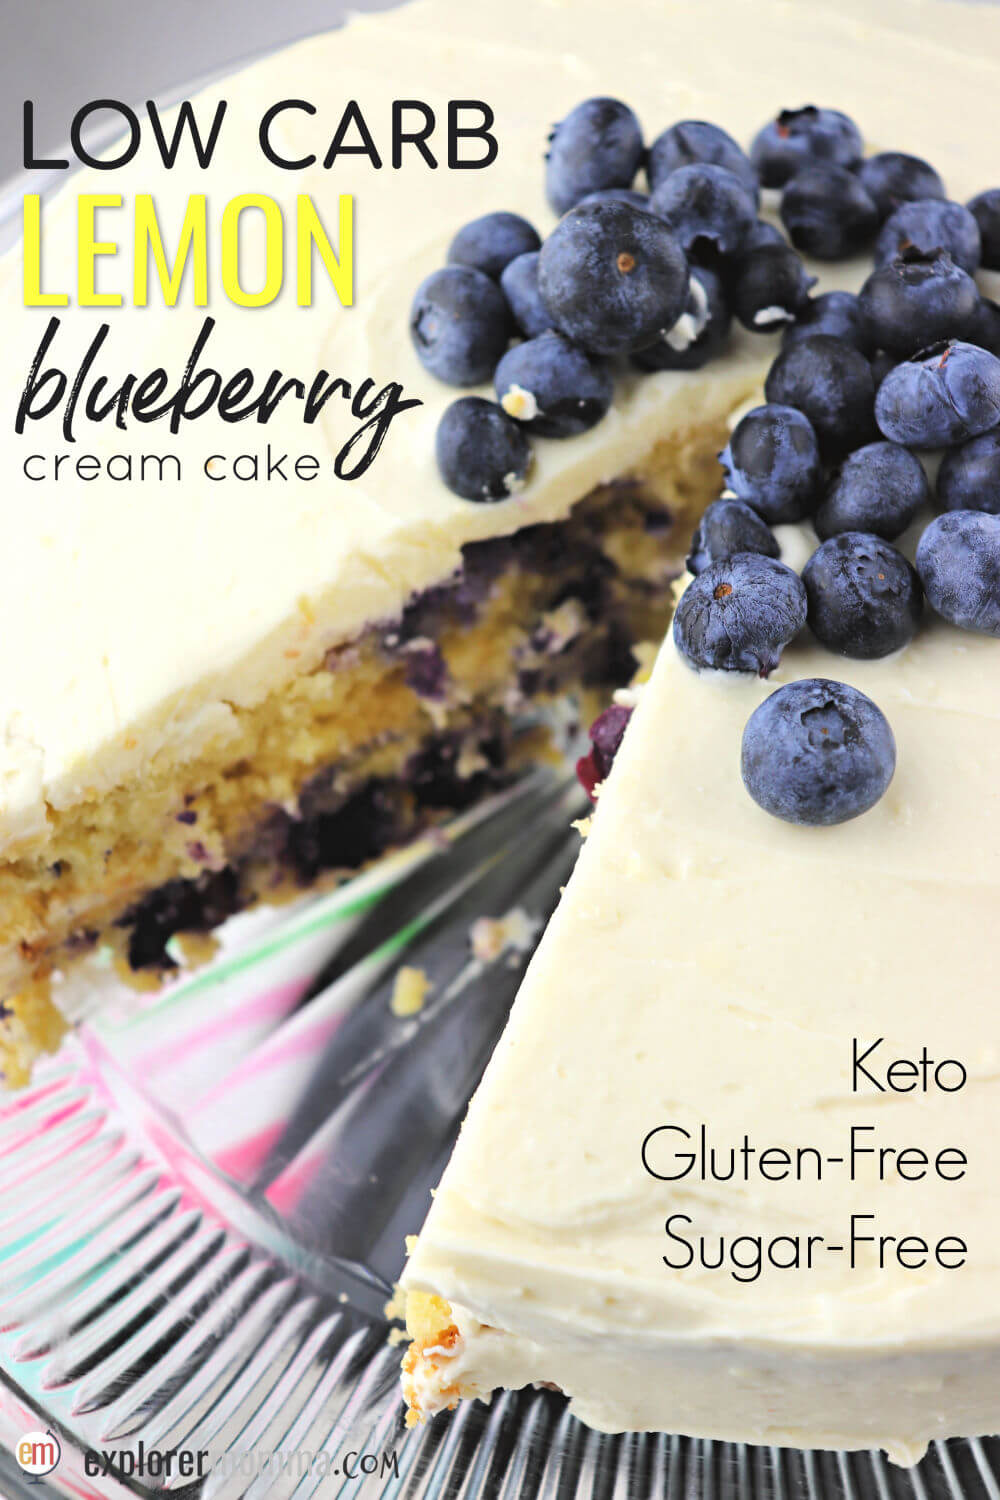 Flavorful and delicious keto Low carb lemon blueberry cream cake is the perfect gluten-free, sugar-free dessert for any party. #ketodesserts #lowcarbdesserts